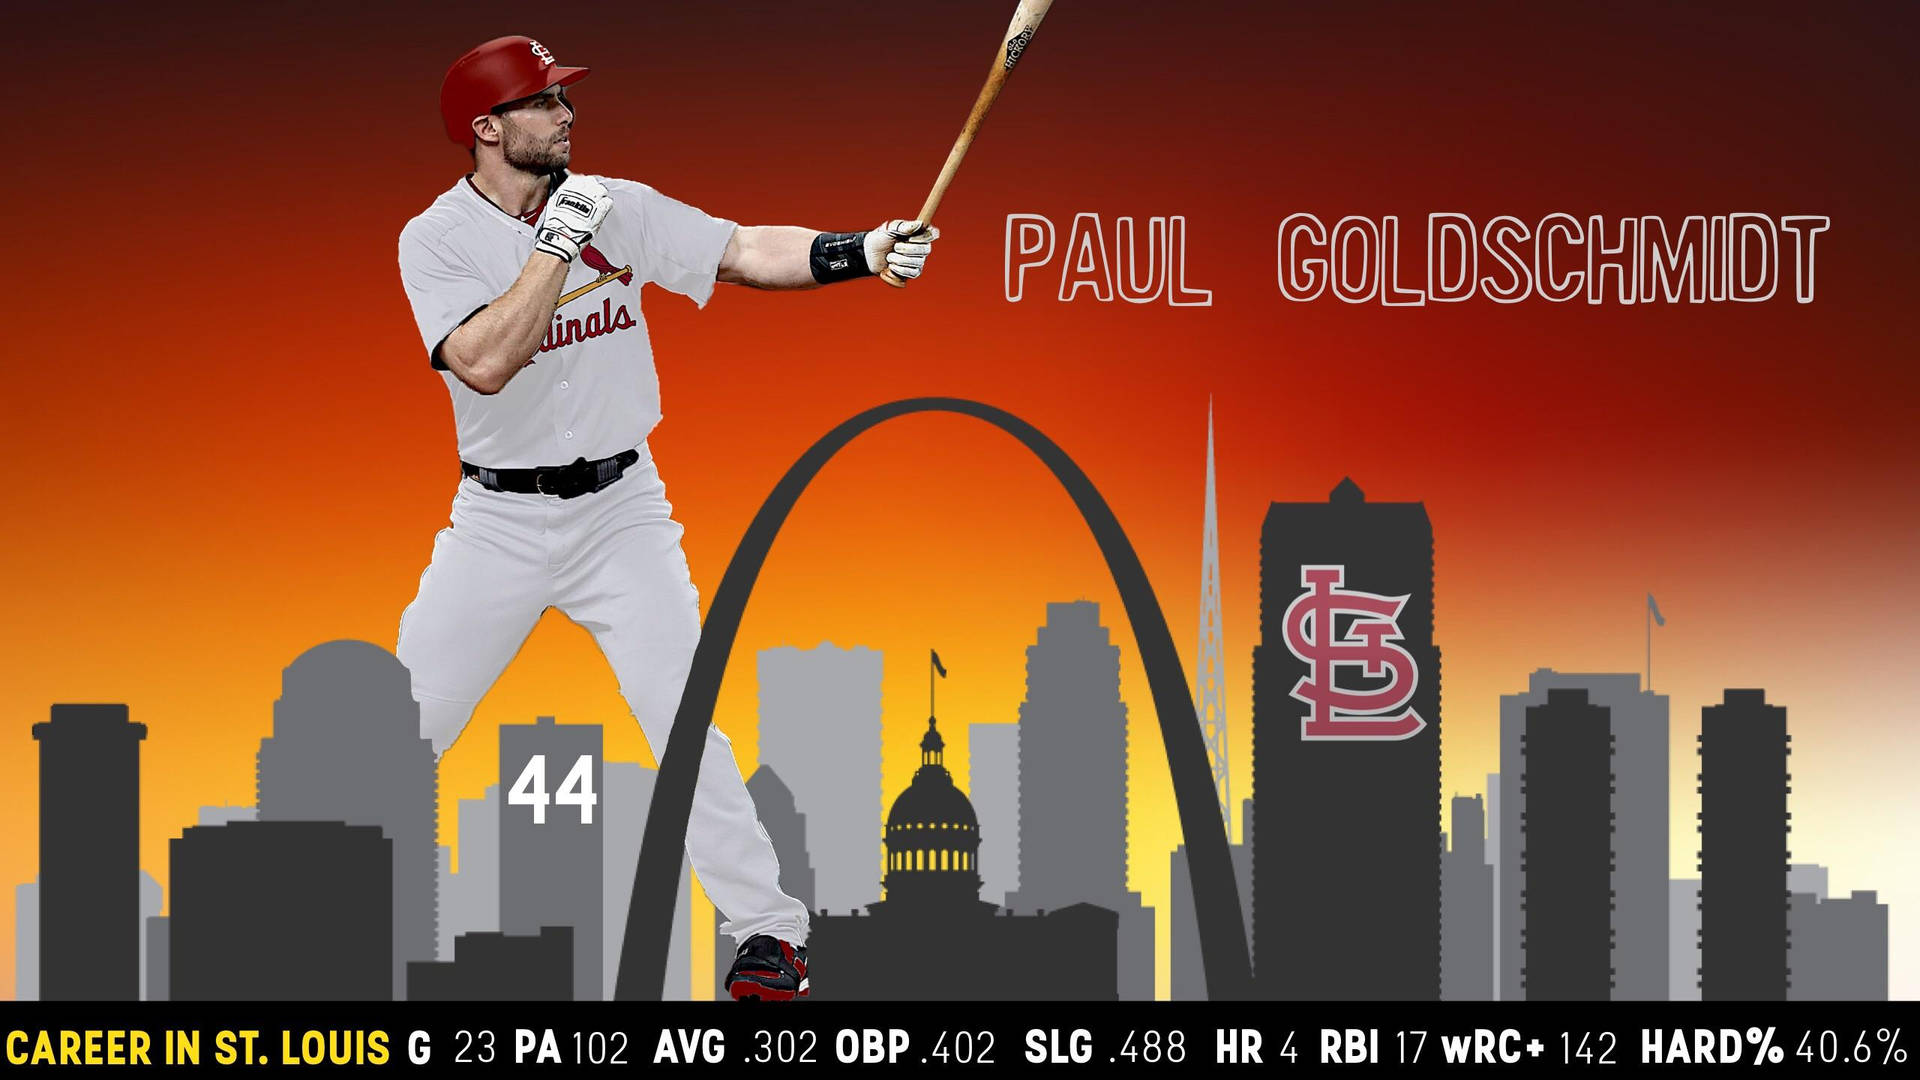 Download wallpapers paul goldschmidt for desktop free High Quality HD  pictures wallpapers  Page 1